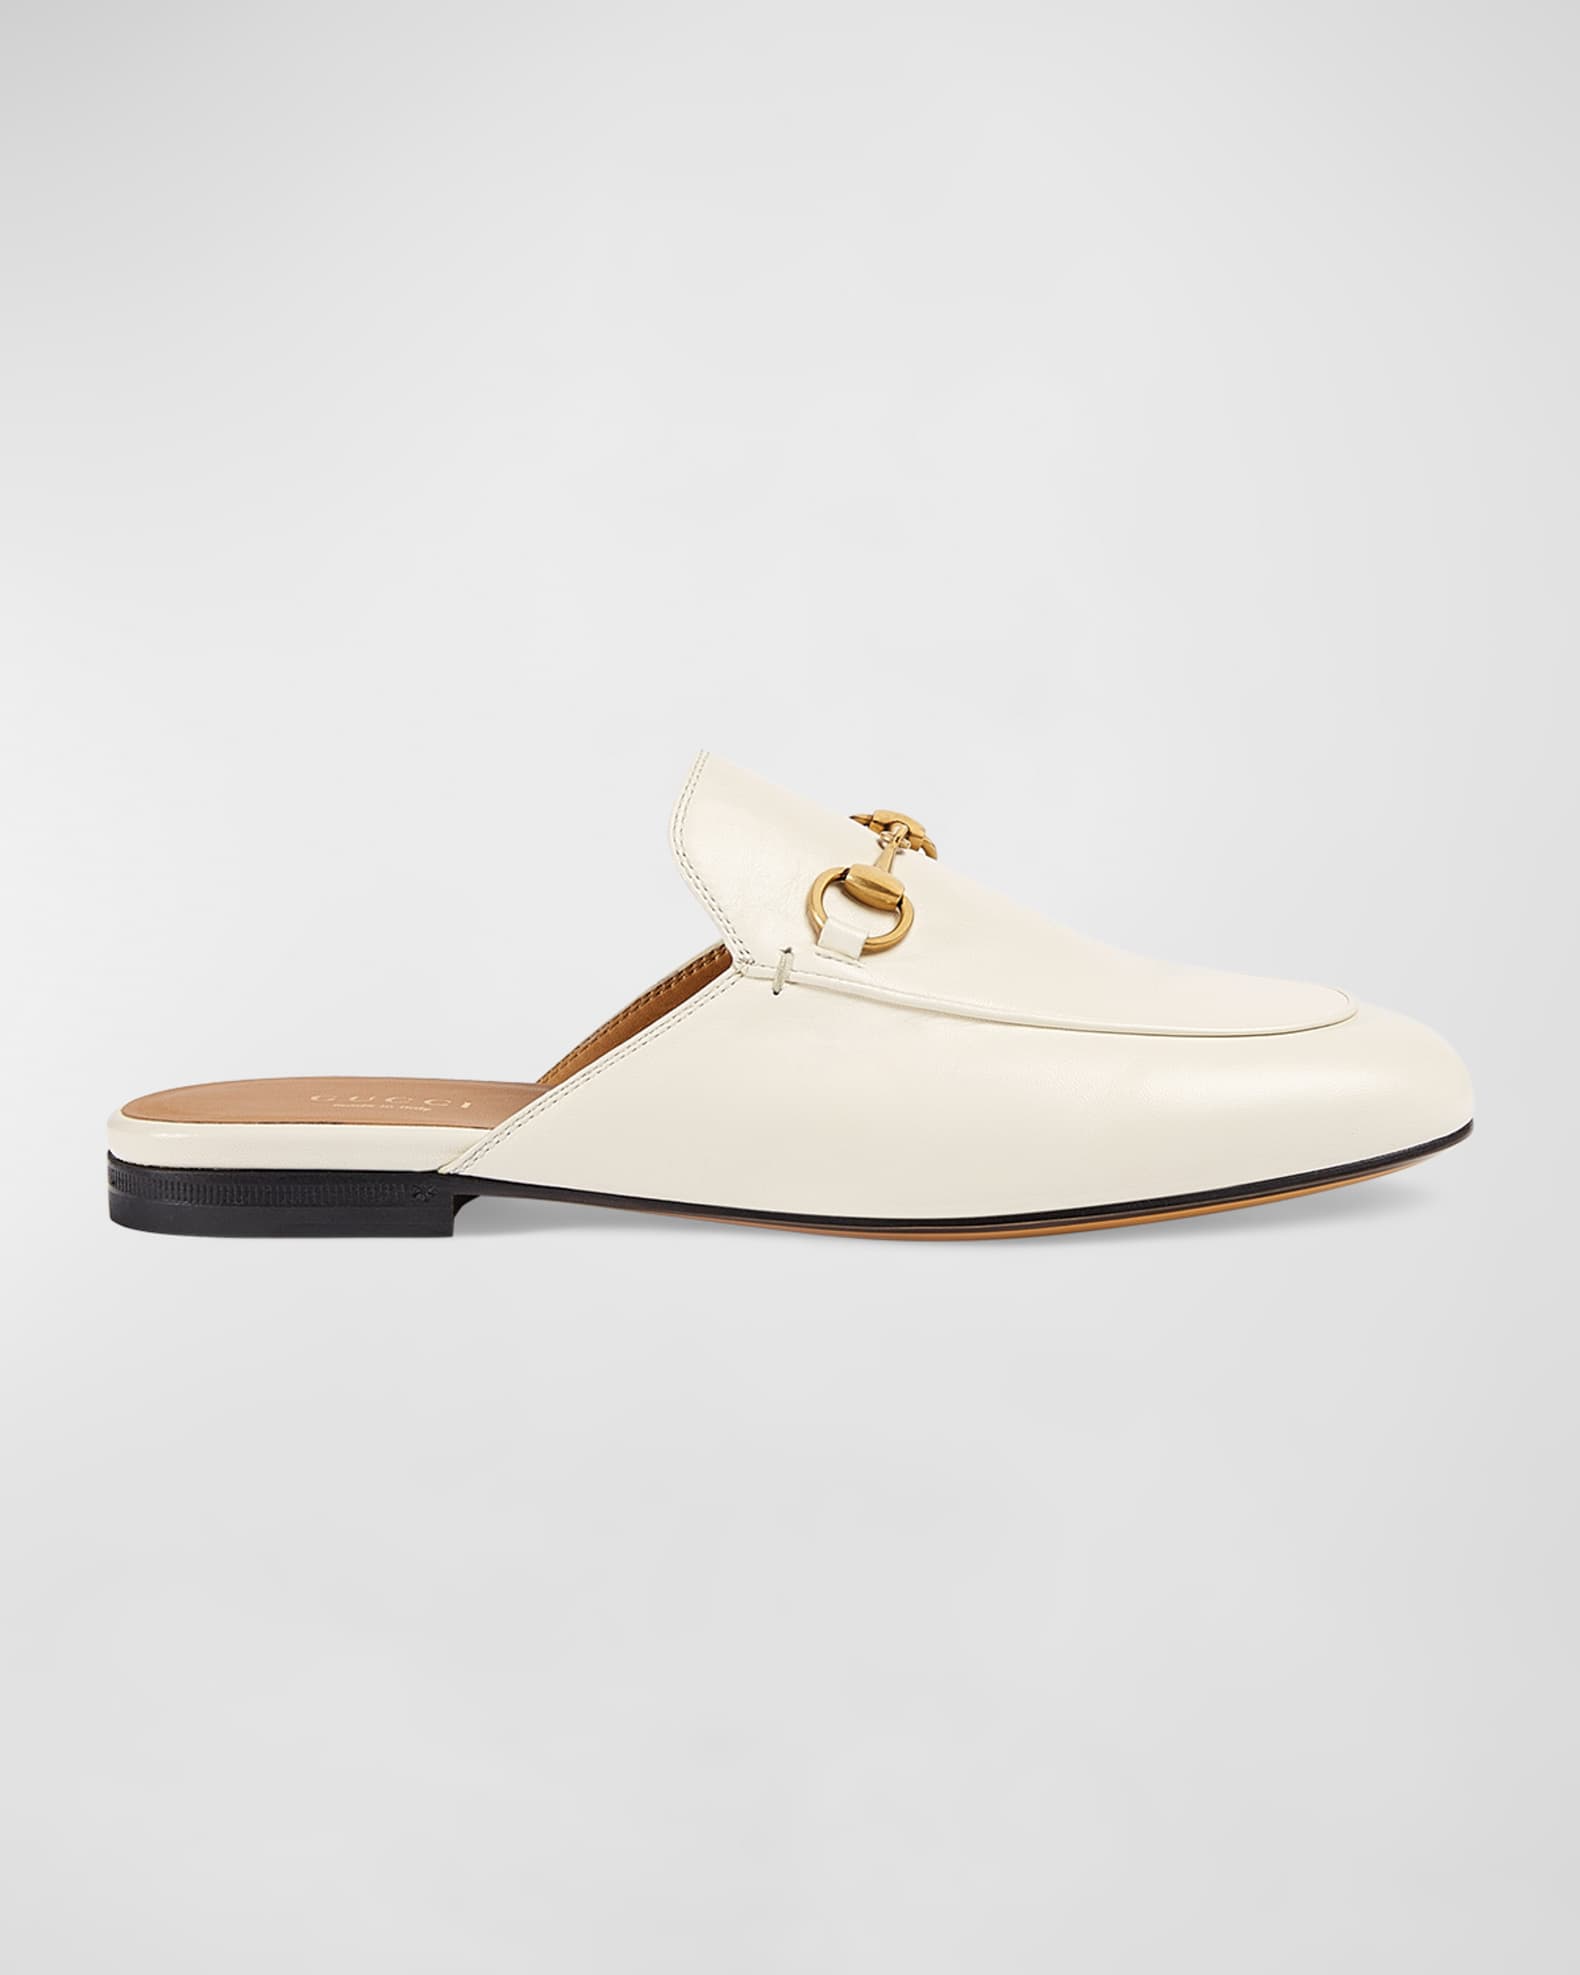 Gucci Princetown Leather Mules Neiman Marcus